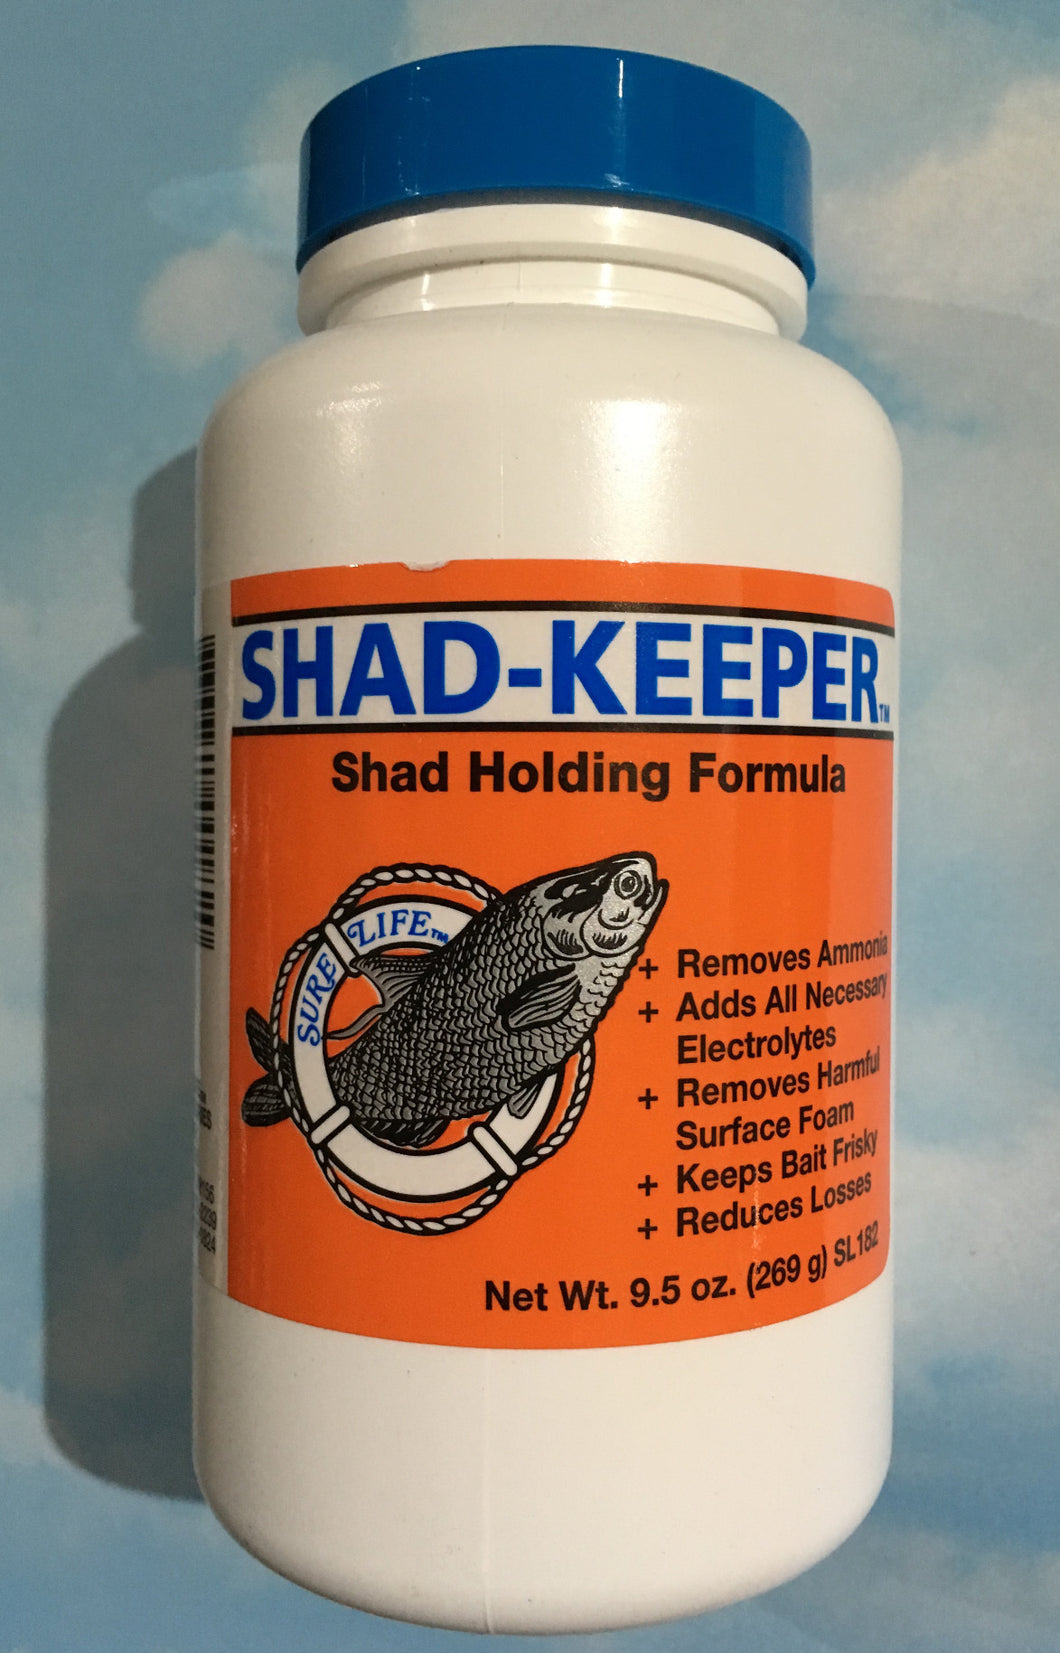 Shad Keeper - Shad Holding Formula by Sure Life